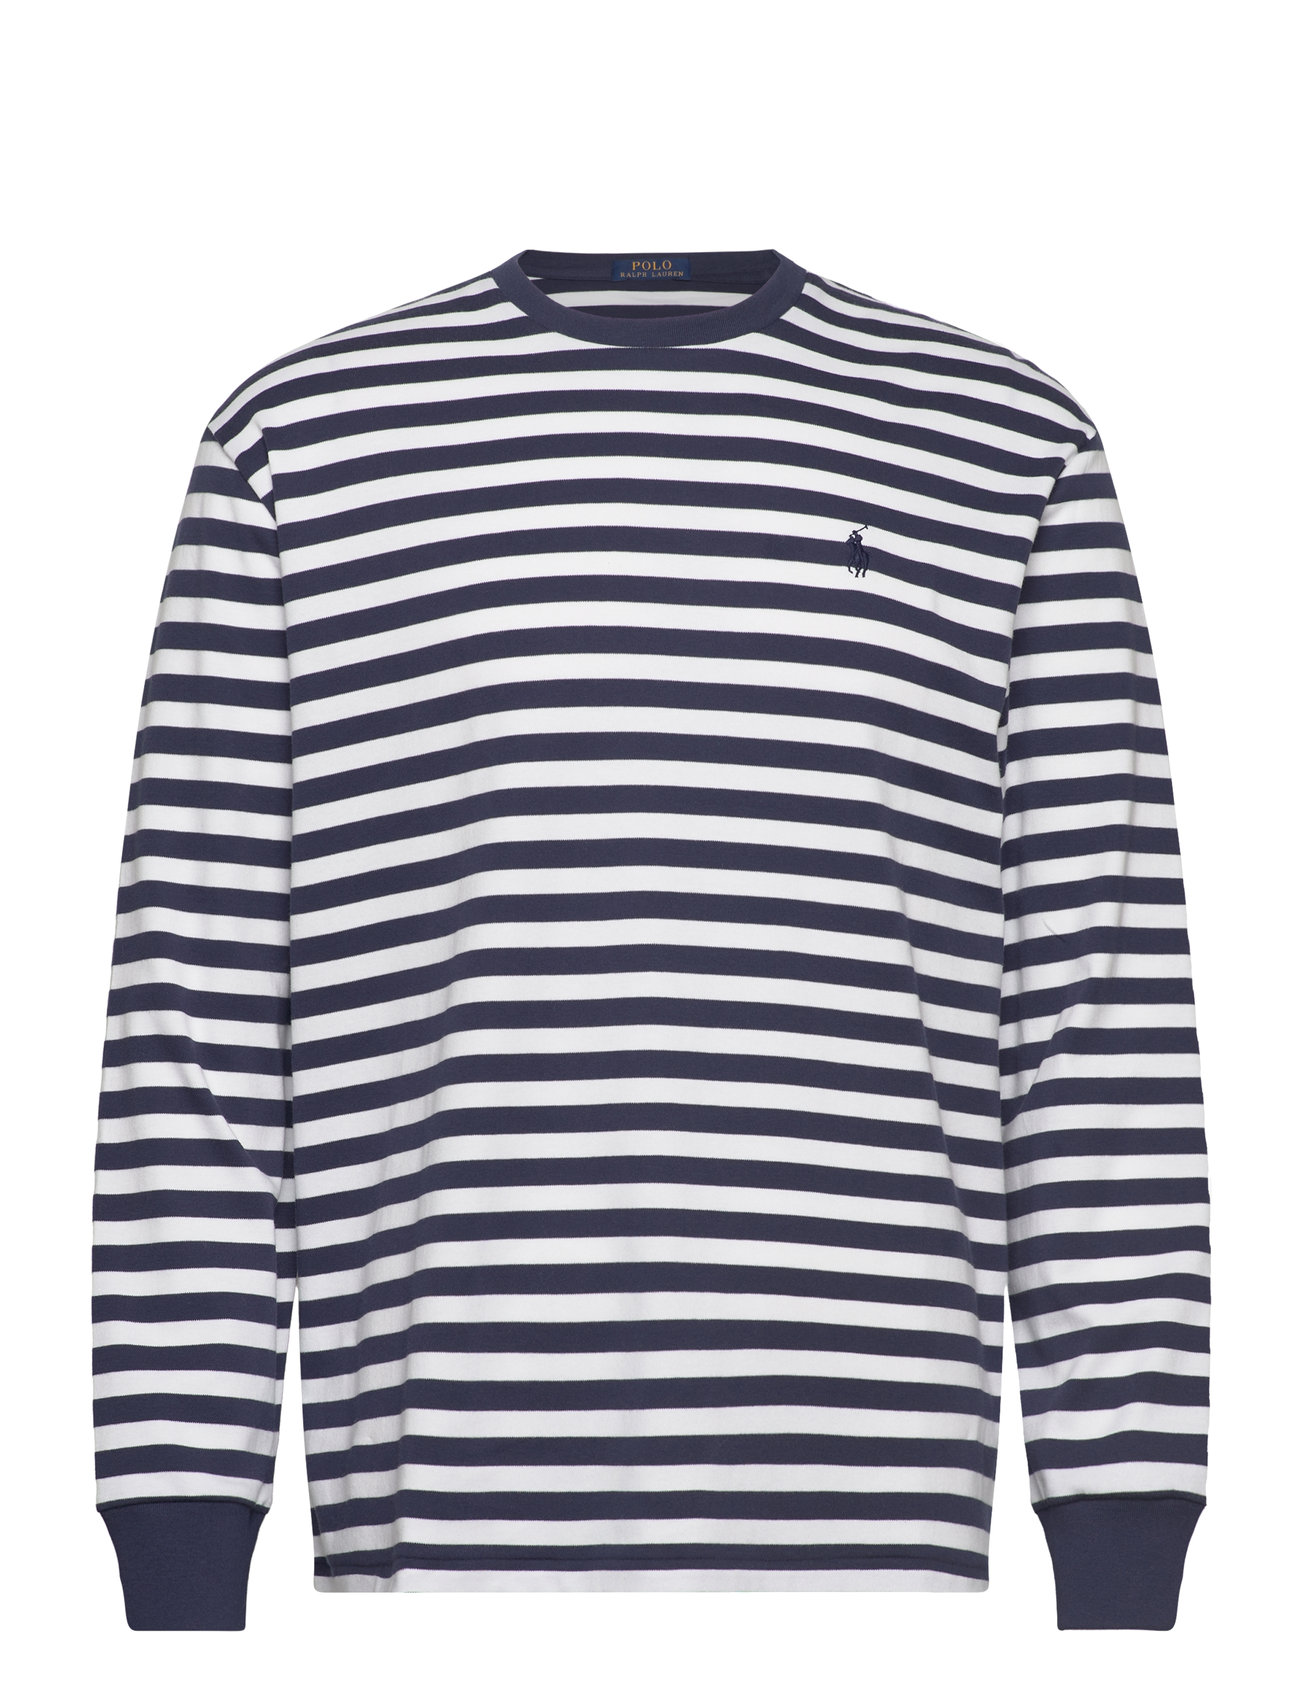 Classic Fit Striped Soft Cotton T-Shirt Tops T-shirts Long-sleeved Navy Polo Ralph Lauren